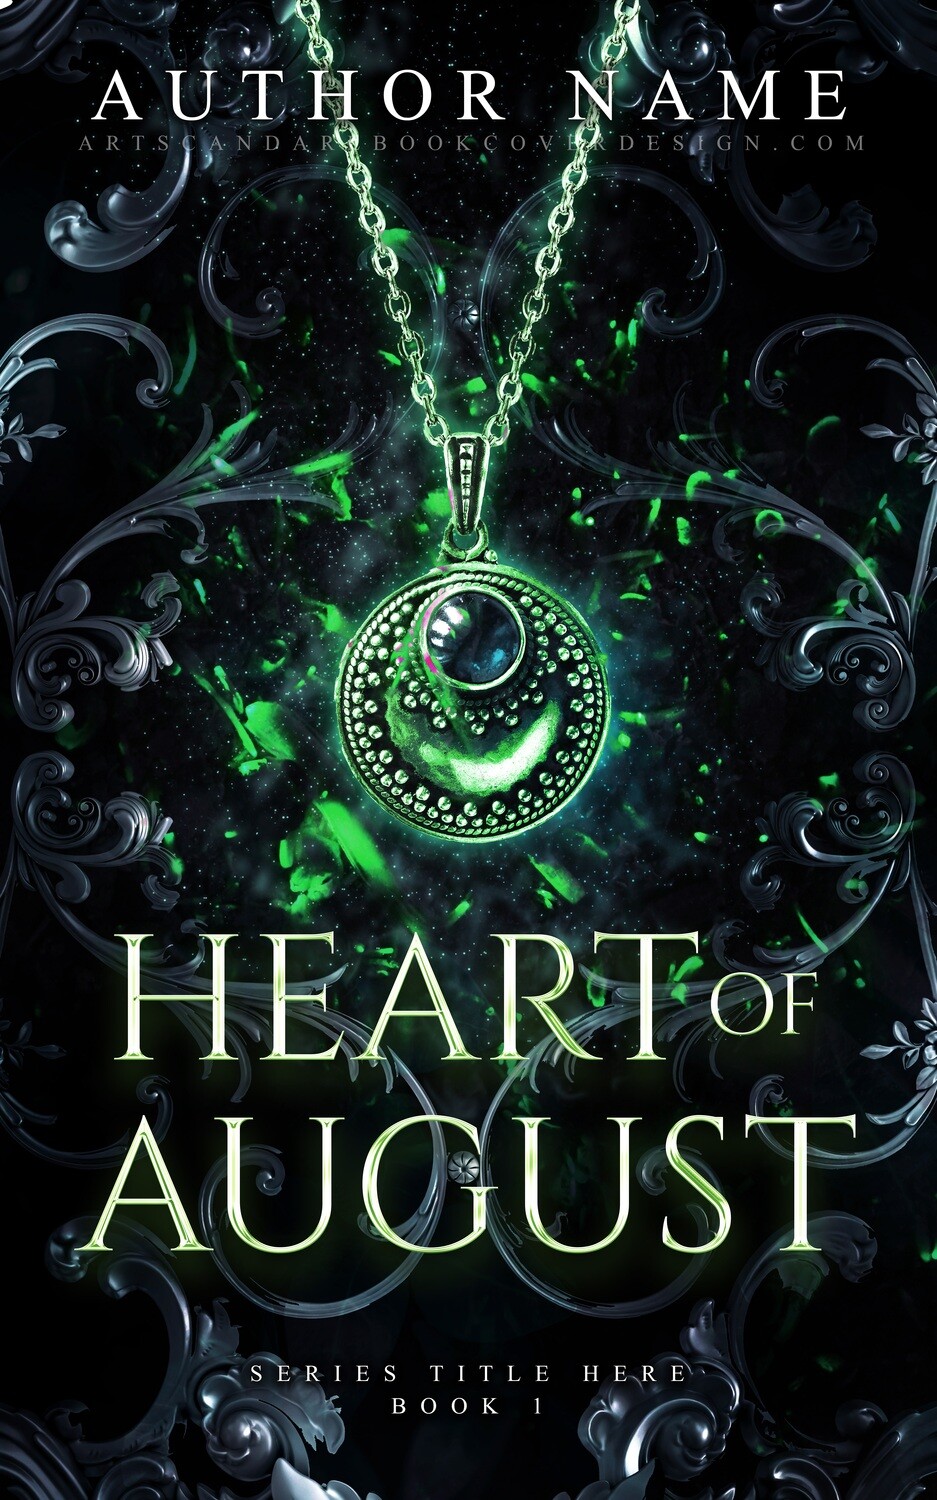 HEART OF AUGUST